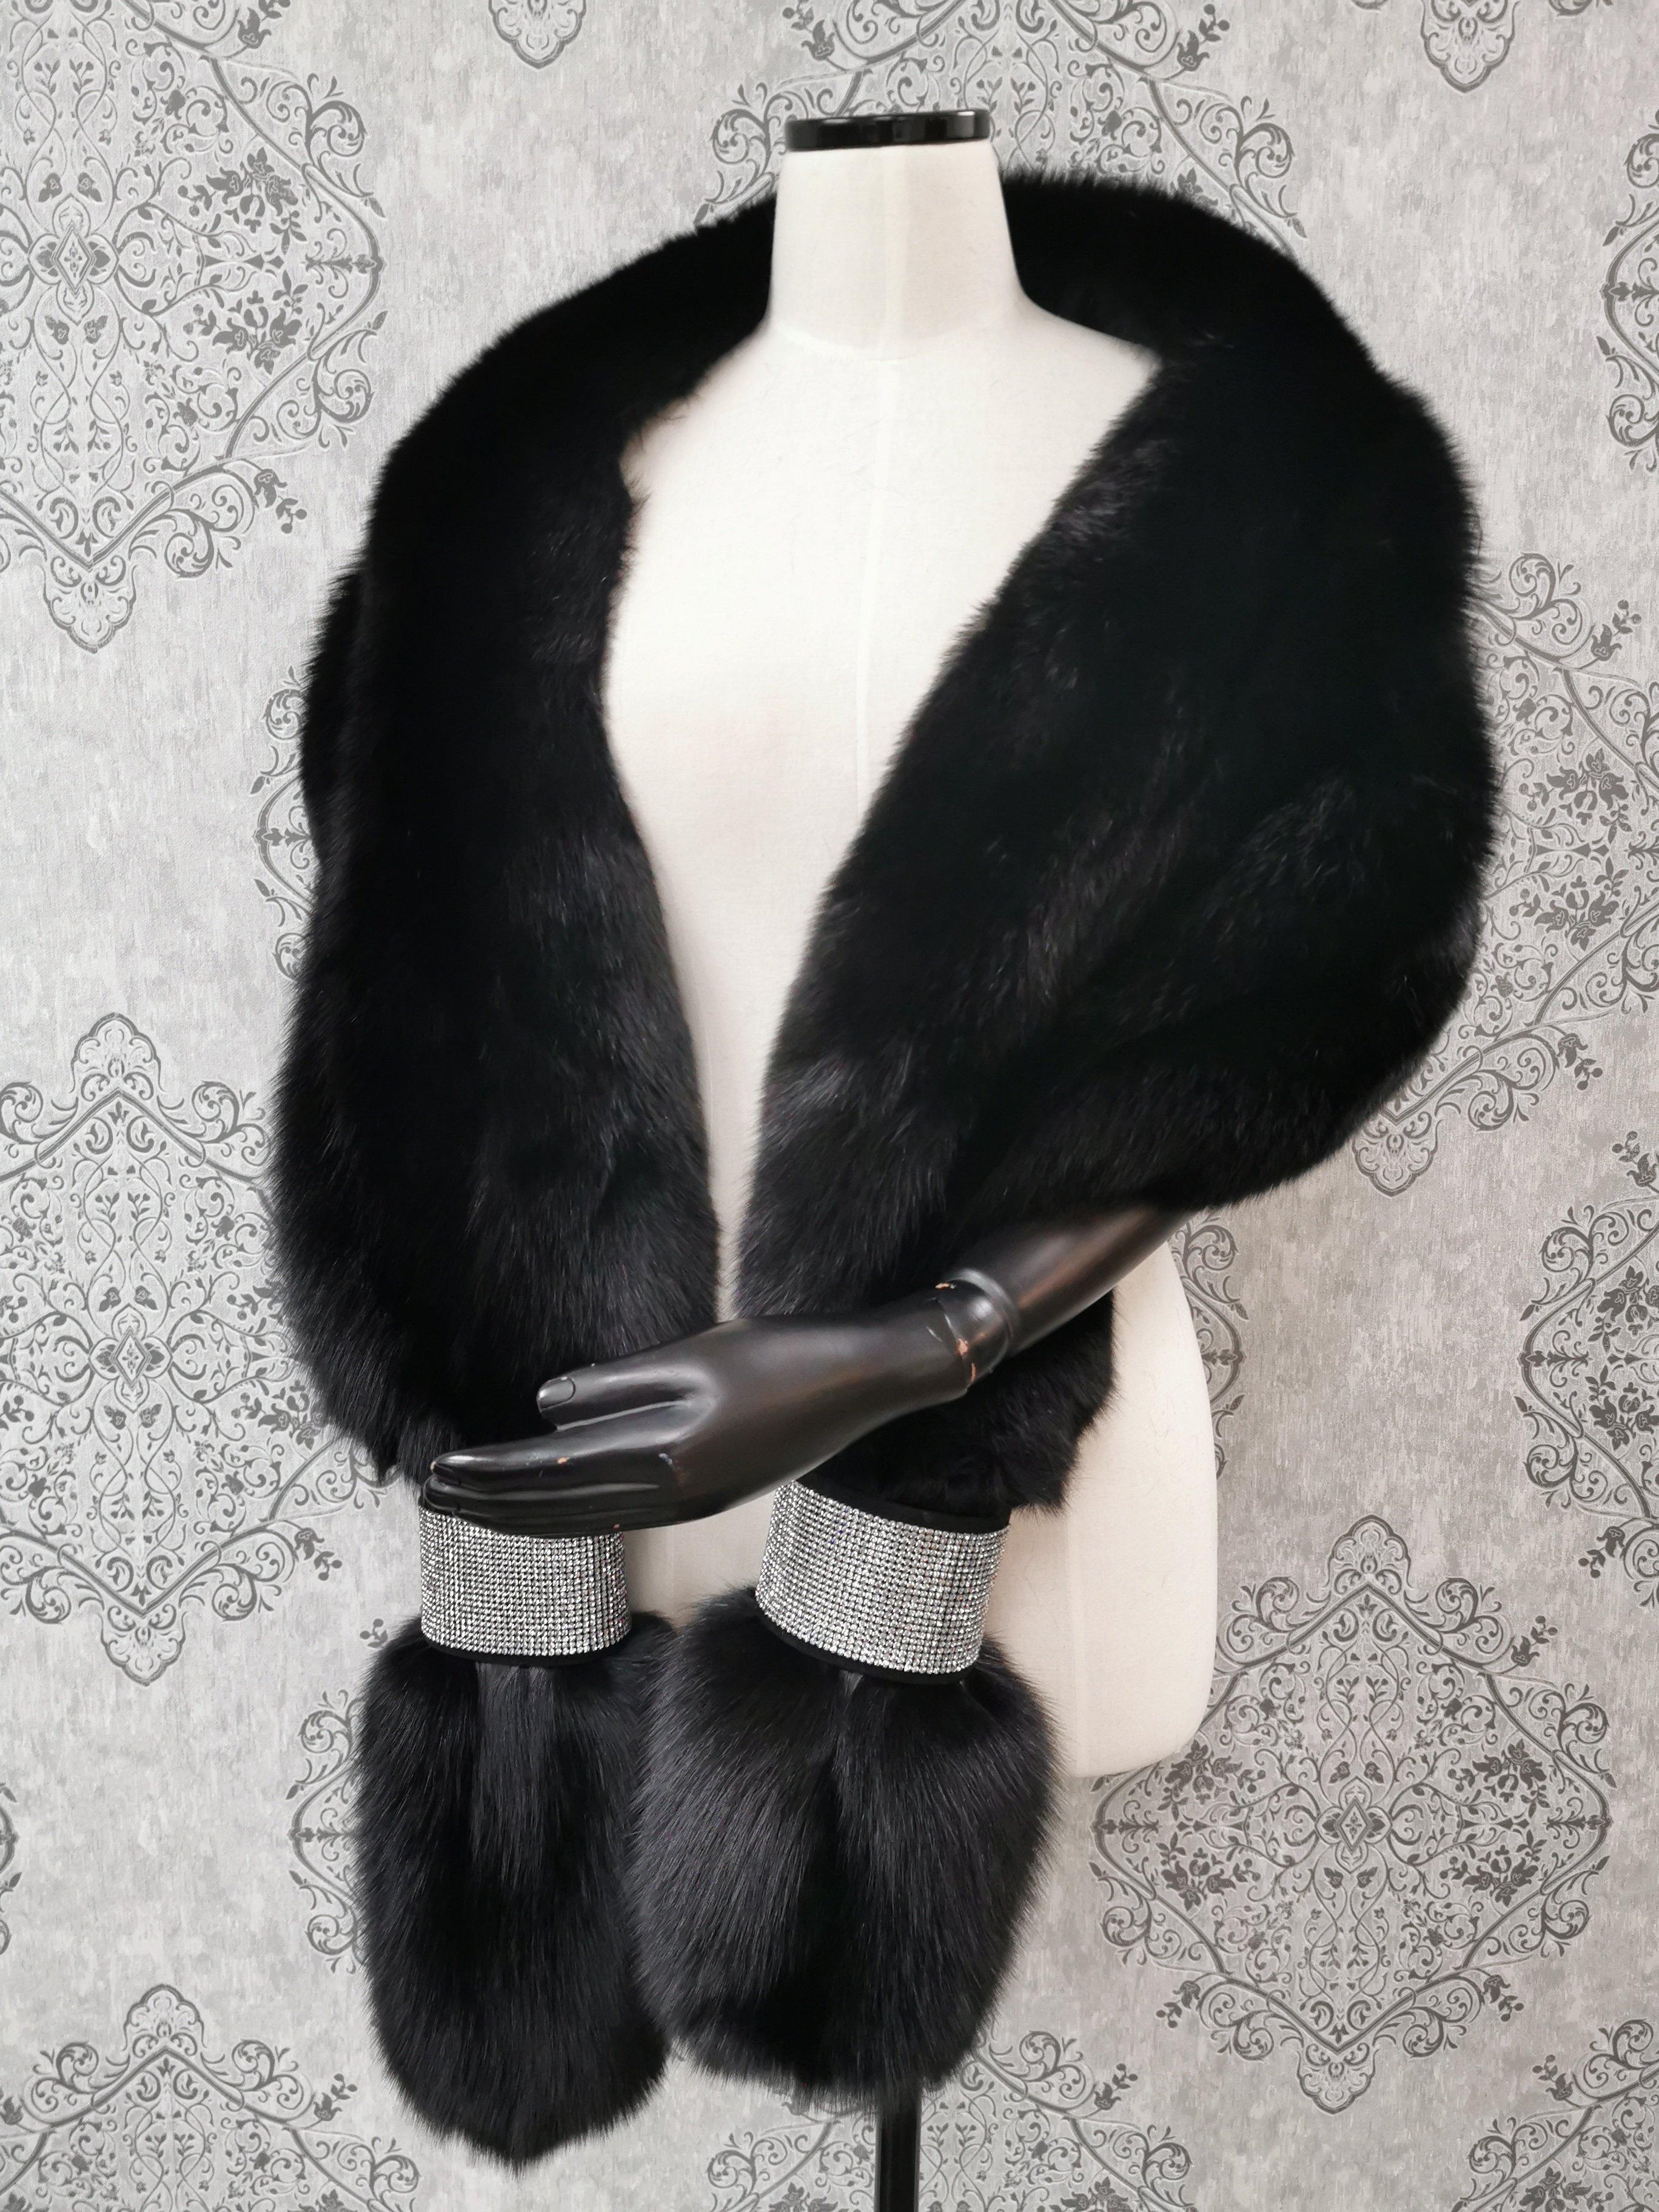 PRODUCT DESCRIPTION:

Brand New Holt Renfrew Fox Fur Cape Shrug Stole 

Condition: Like new

Closure: Hooks & Eyes

Color: Black

Material: Fox fur

Garment type: Stole

Lining: Silk Satin

Made in Canada

MEASUREMENTS
-Size: One size

-Length: